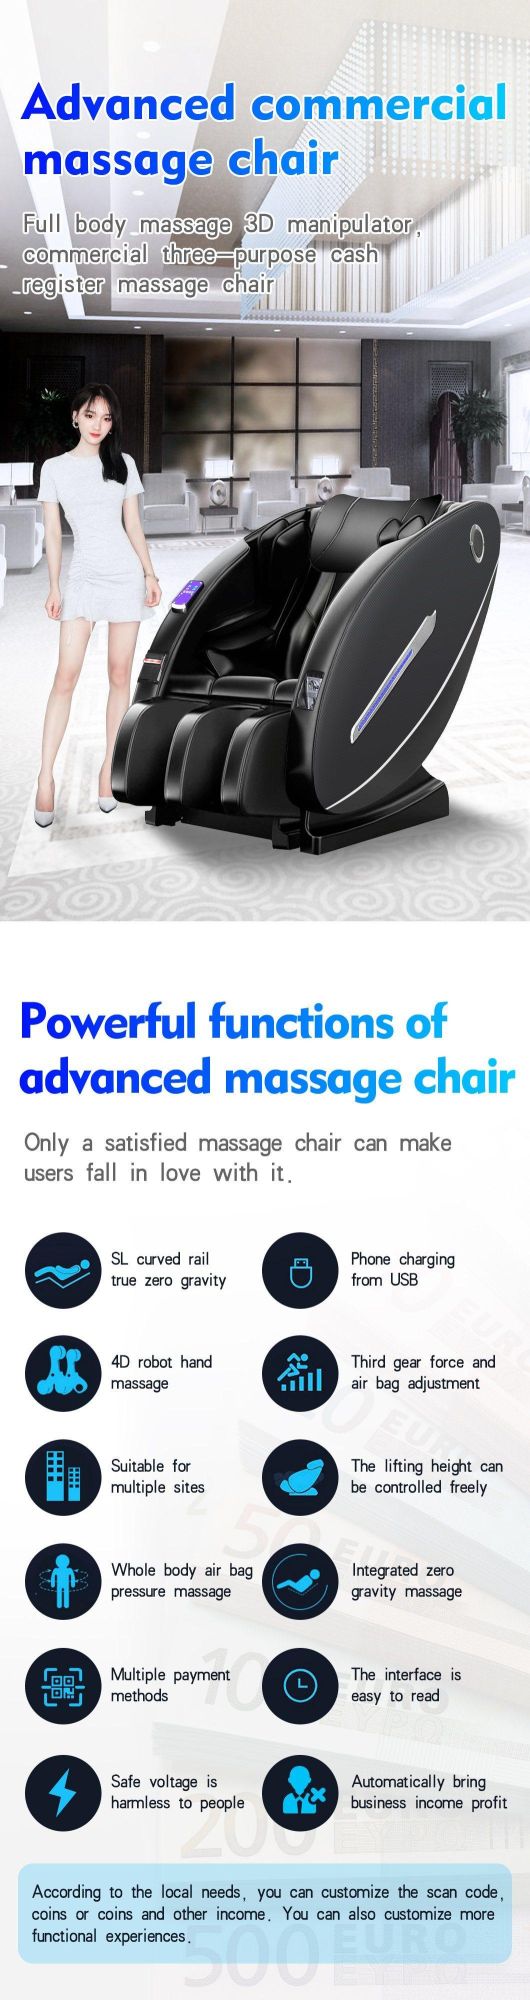 New Comfortable Auto Paper Money Operated Commercial Vending Massage Chai